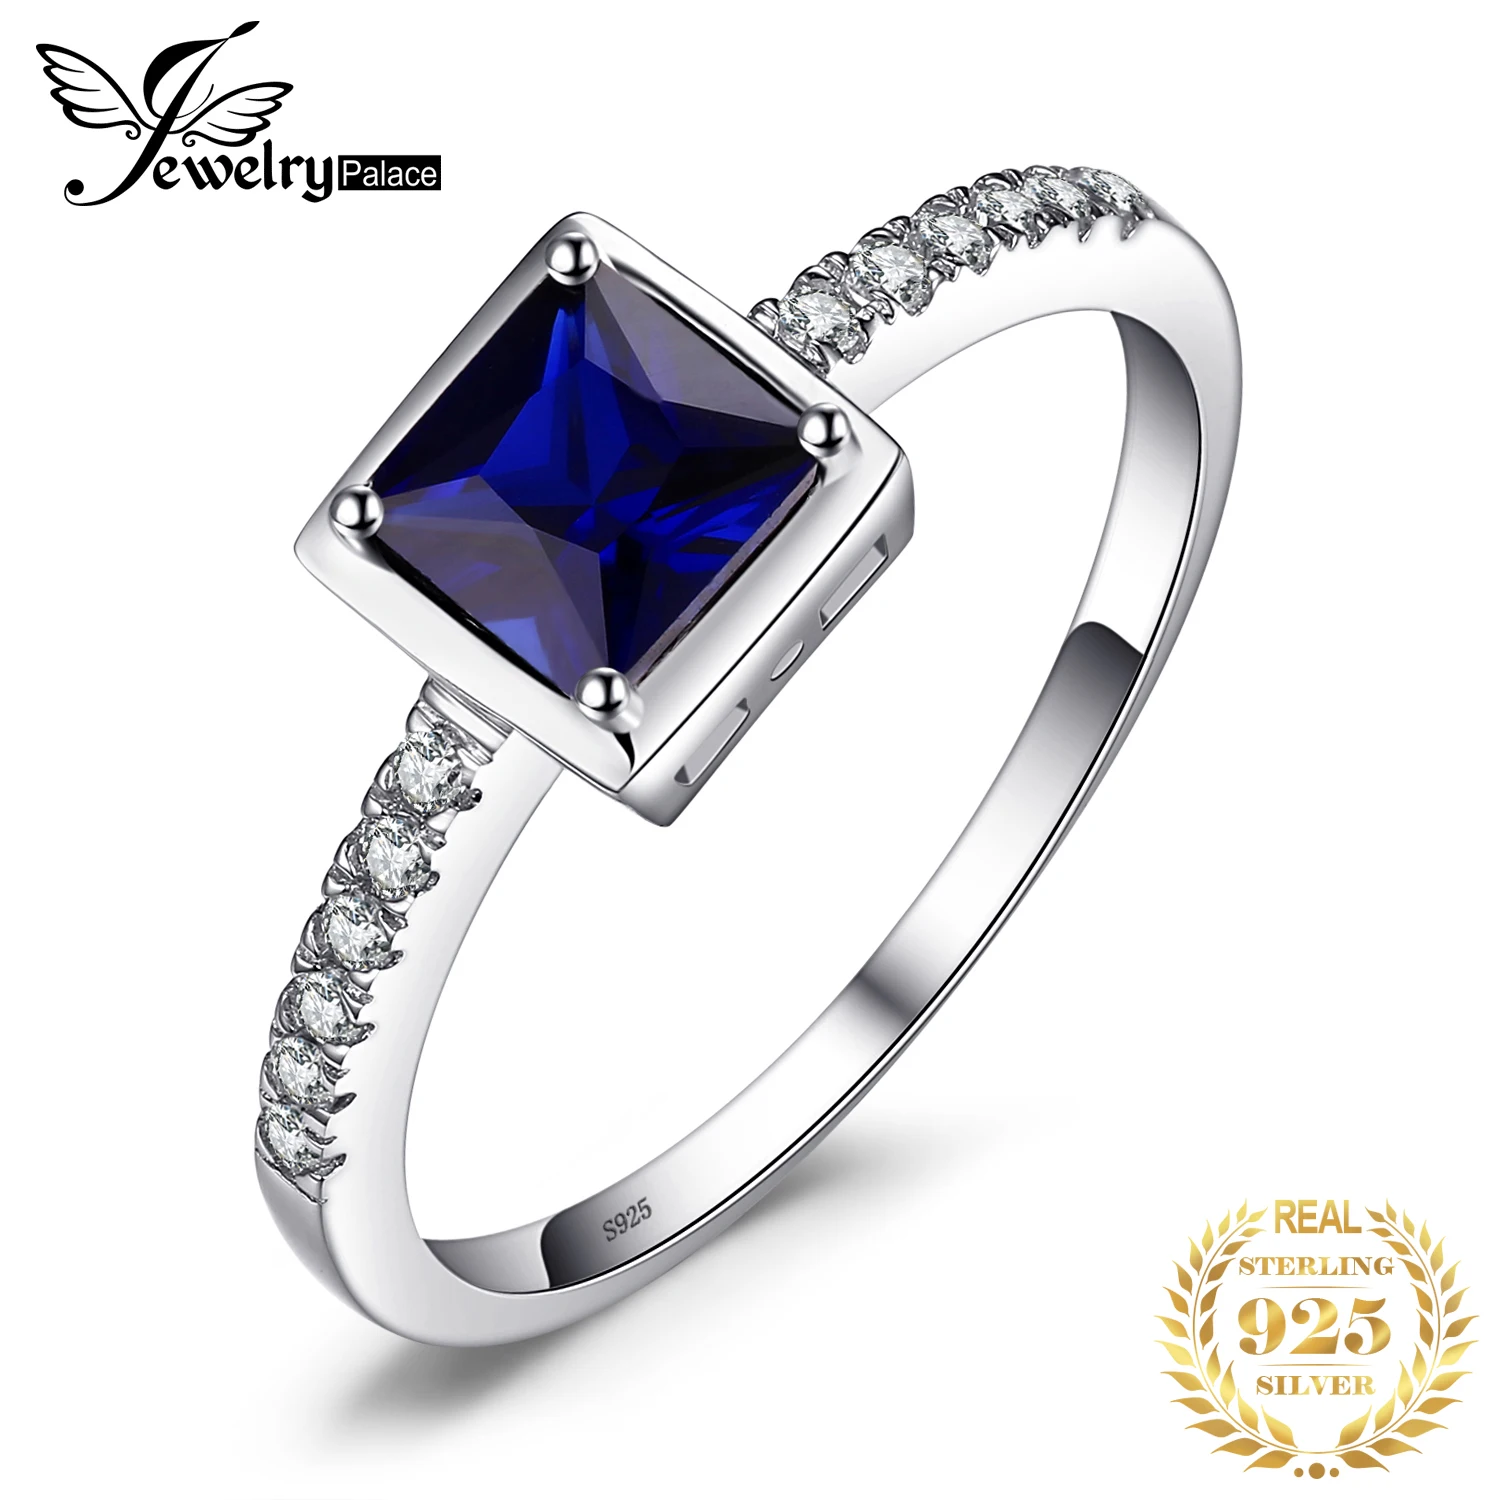 

JewelryPalace Square Created Blue Sapphire Ring 925 Sterling Silver Rings for Women Engagement Ring Silver 925 Gemstones Jewelry